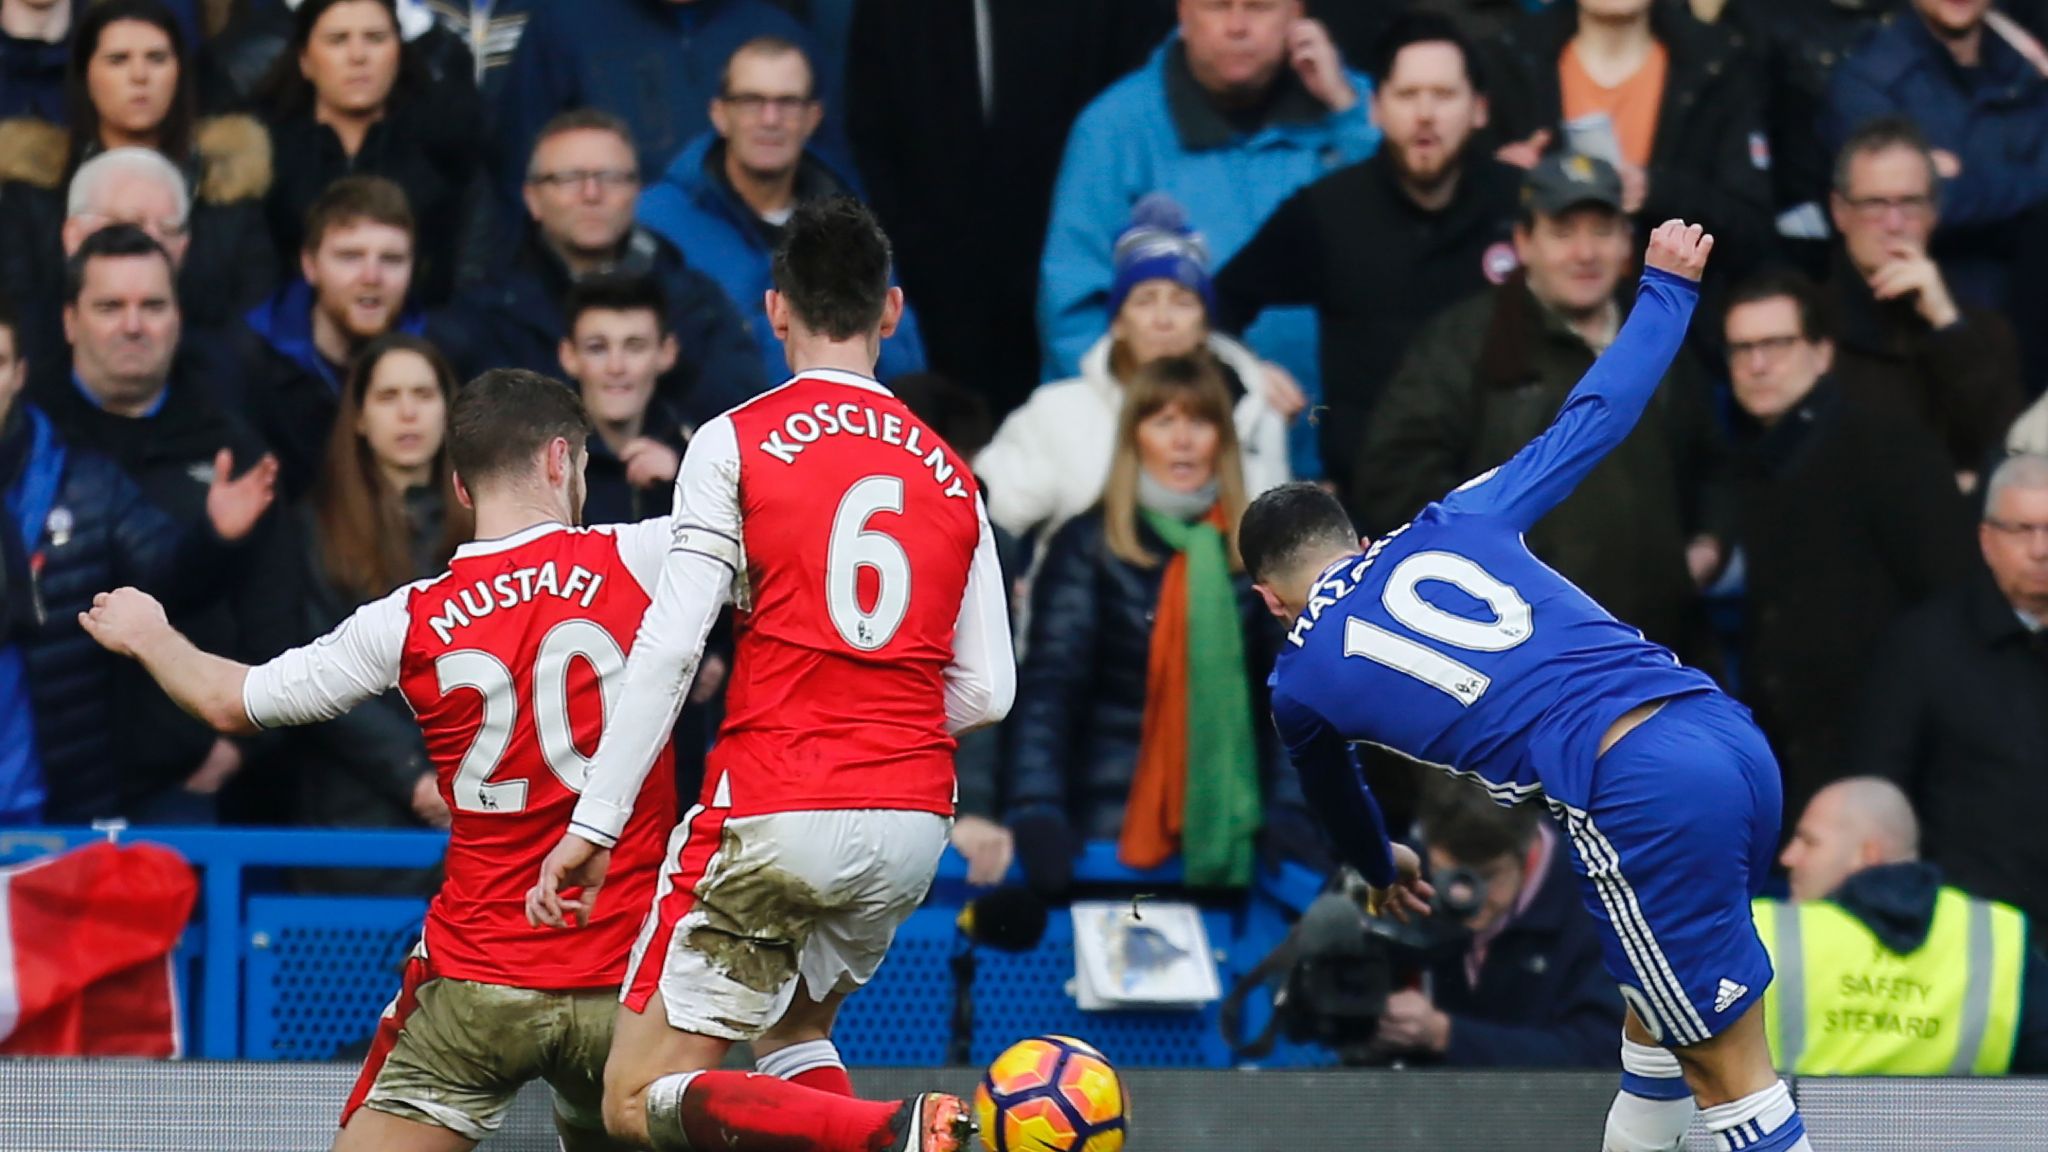 Chelsea 3 - 1 Arsenal - Match Report & Highlights